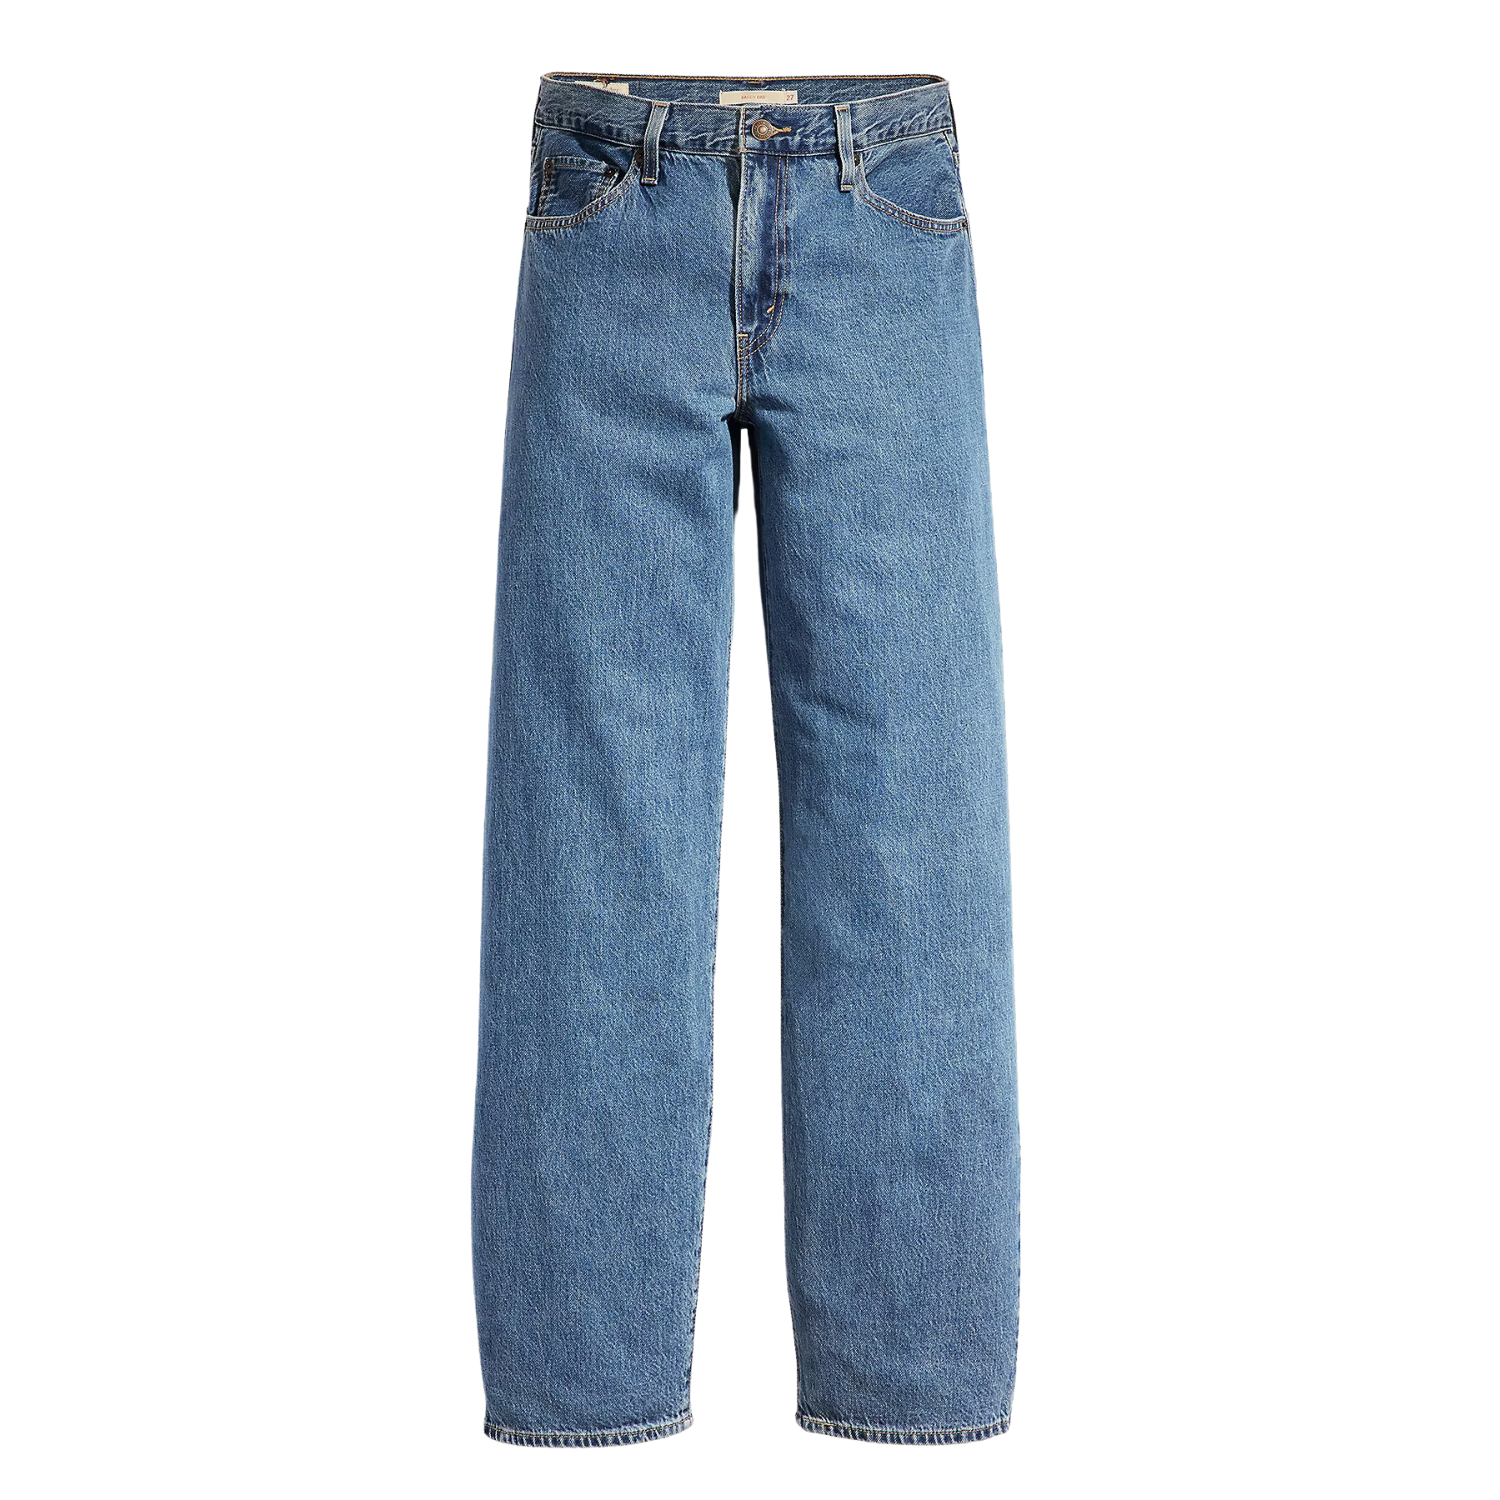 BAGGY DAD JEANS - IN THE MIDDLE W DAMAGE I LEVI'S - Momentum Clothing